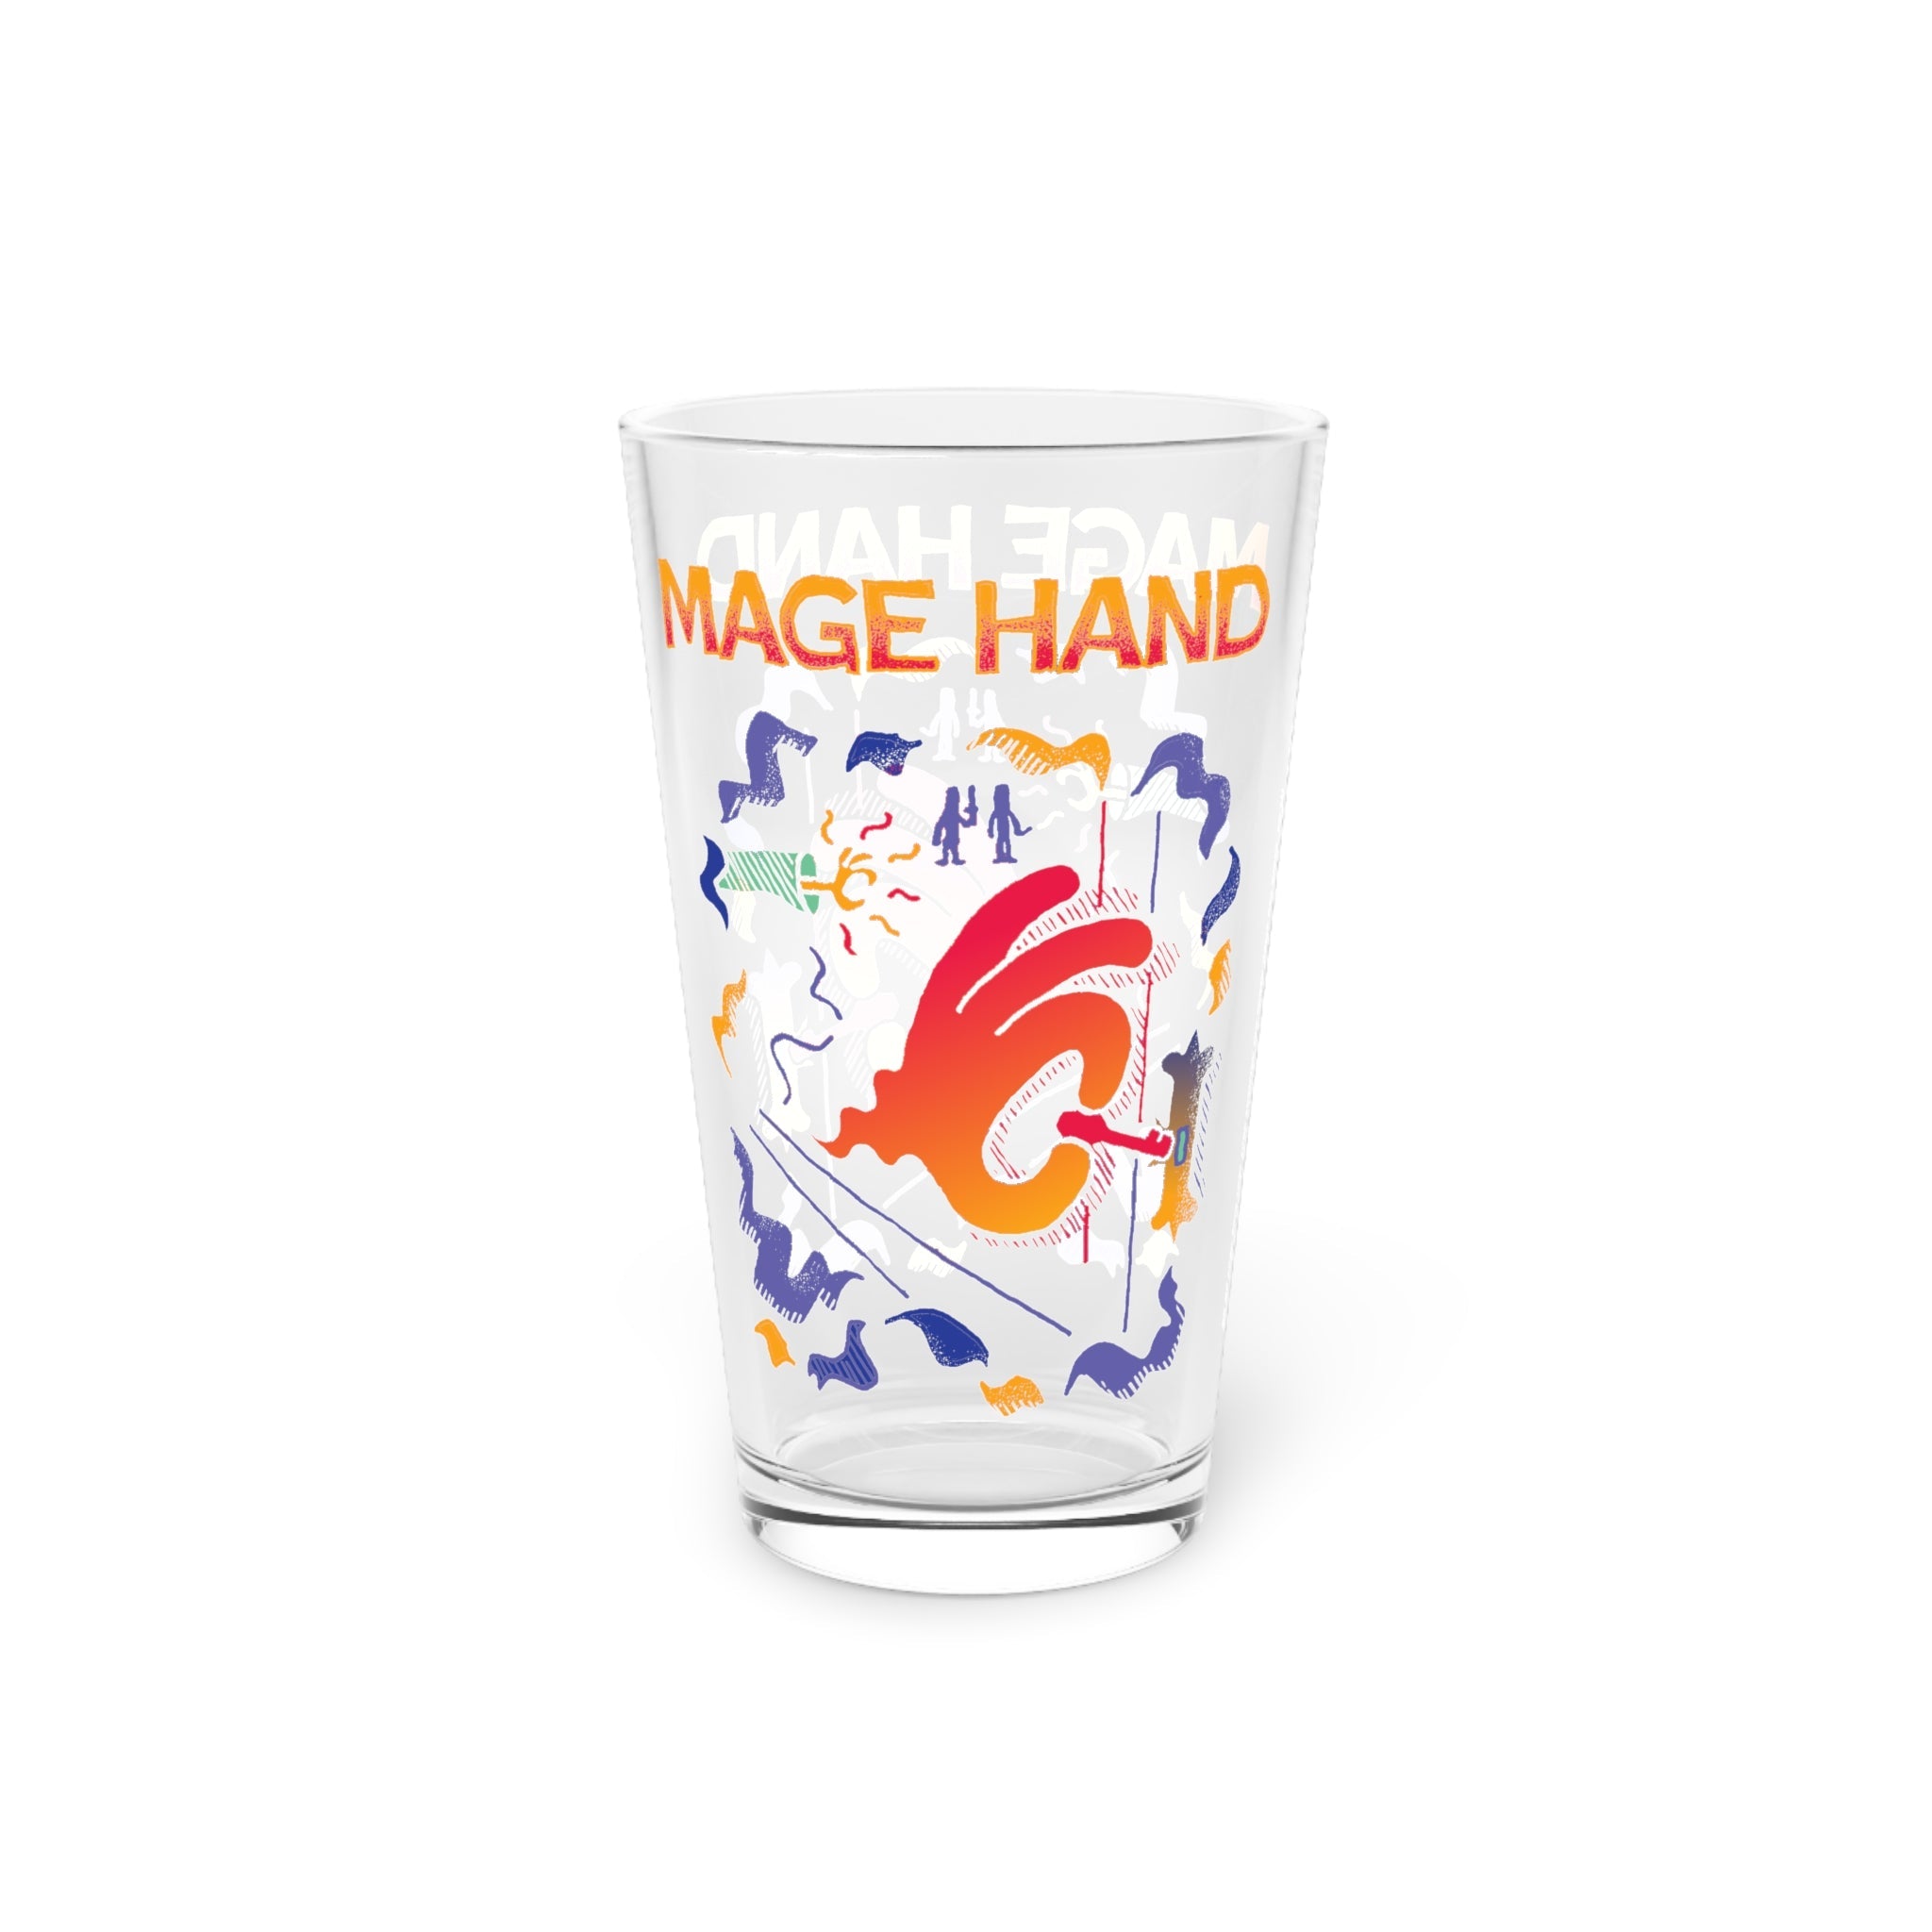 Mage Hand | Pint Glass, 16oz - Drinkware Sets - Ace of Gnomes - 32372228956069738547